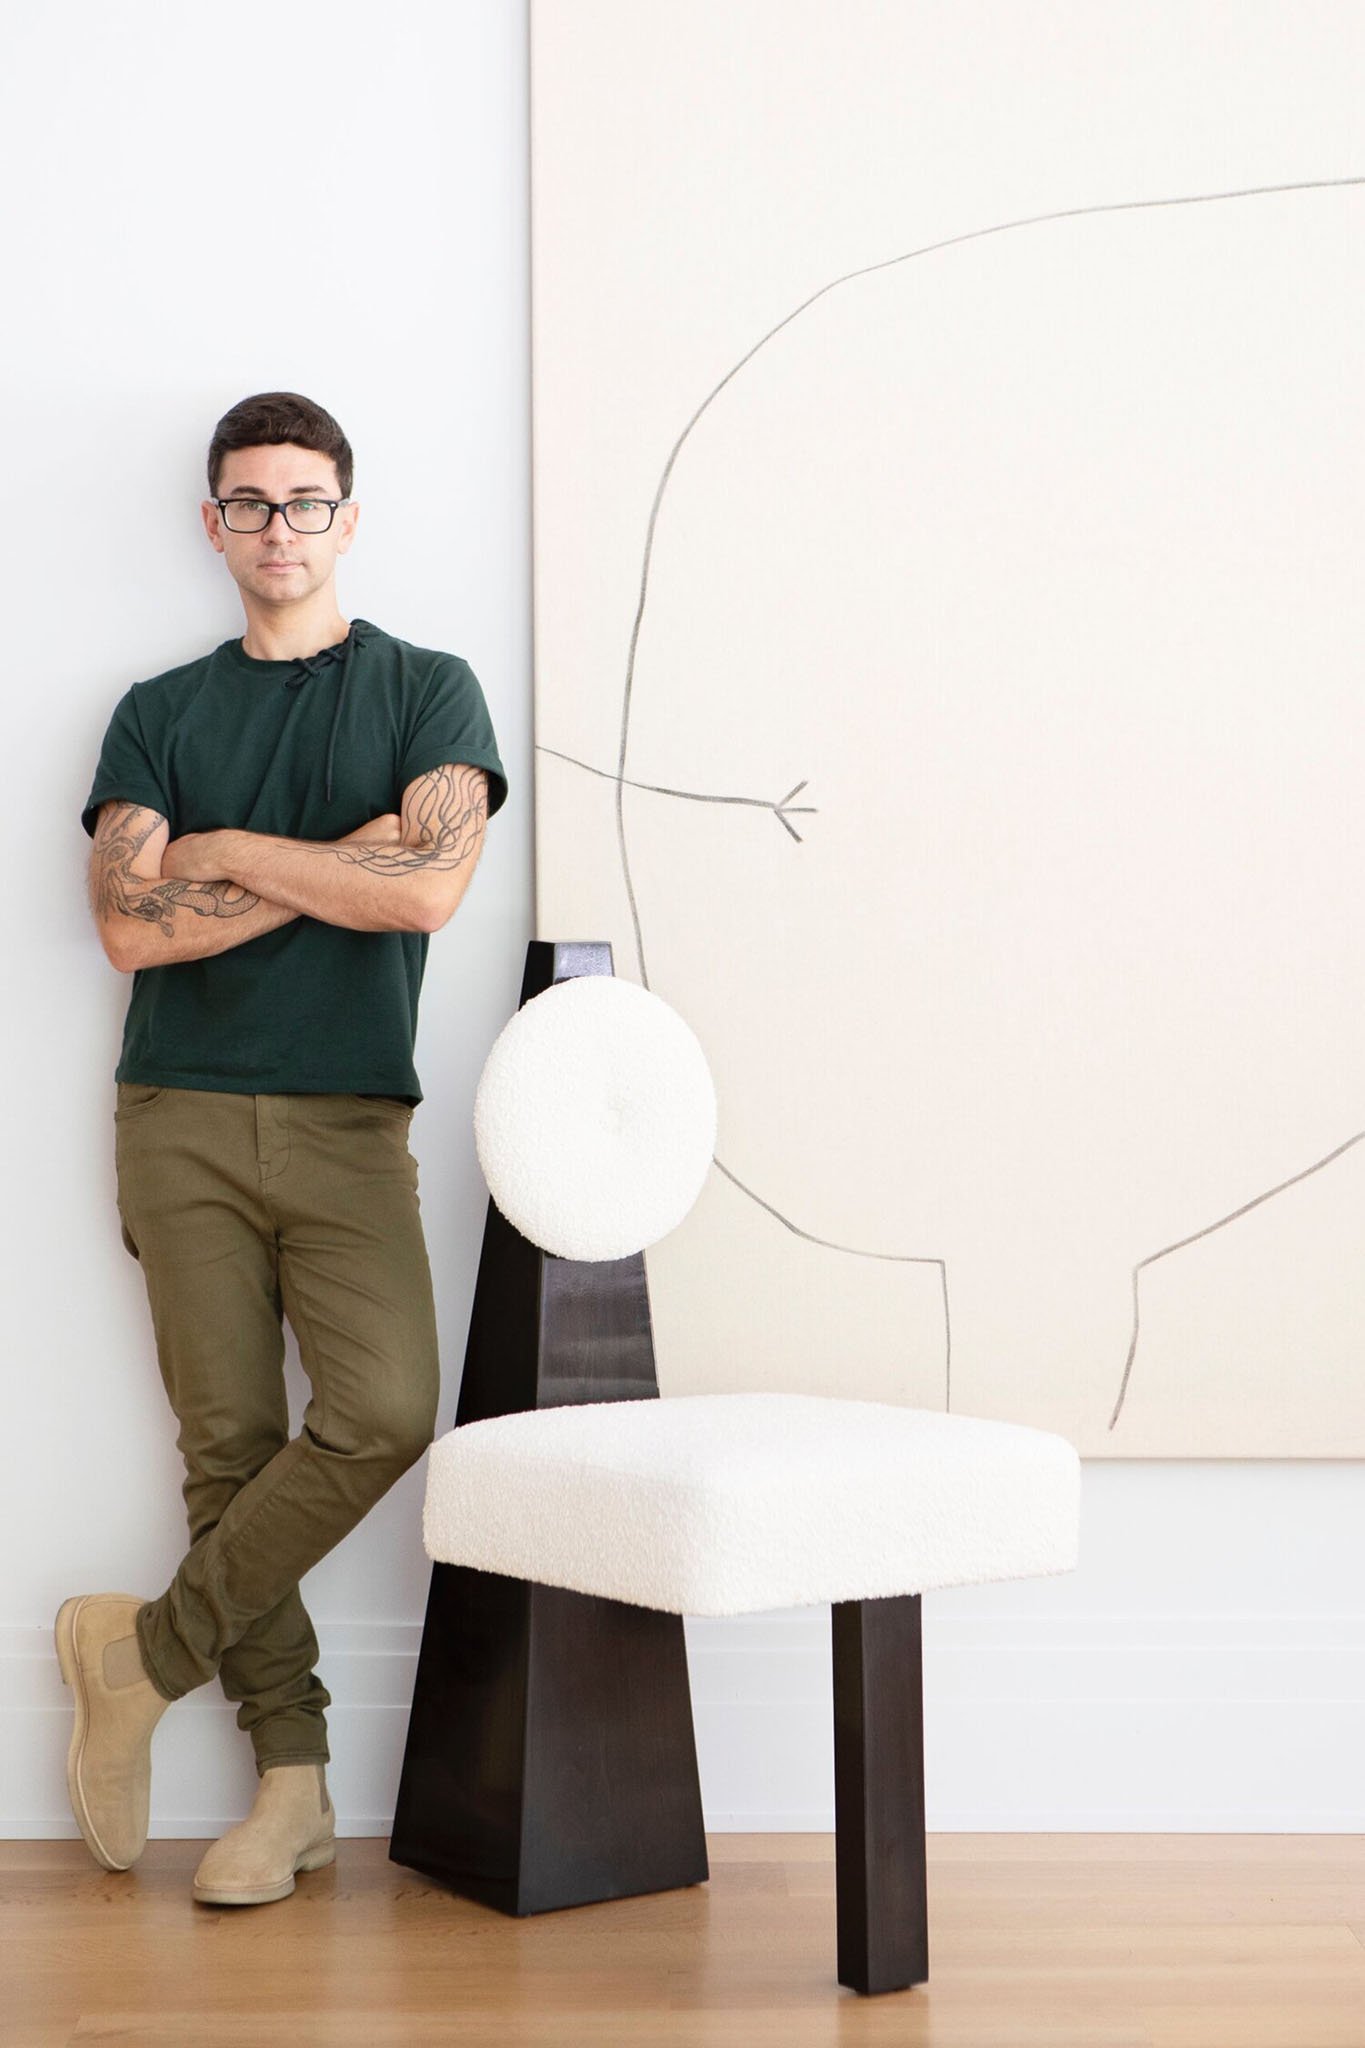 Christian Siriano branched out into interior design with the launch of his furniture collection in 2021